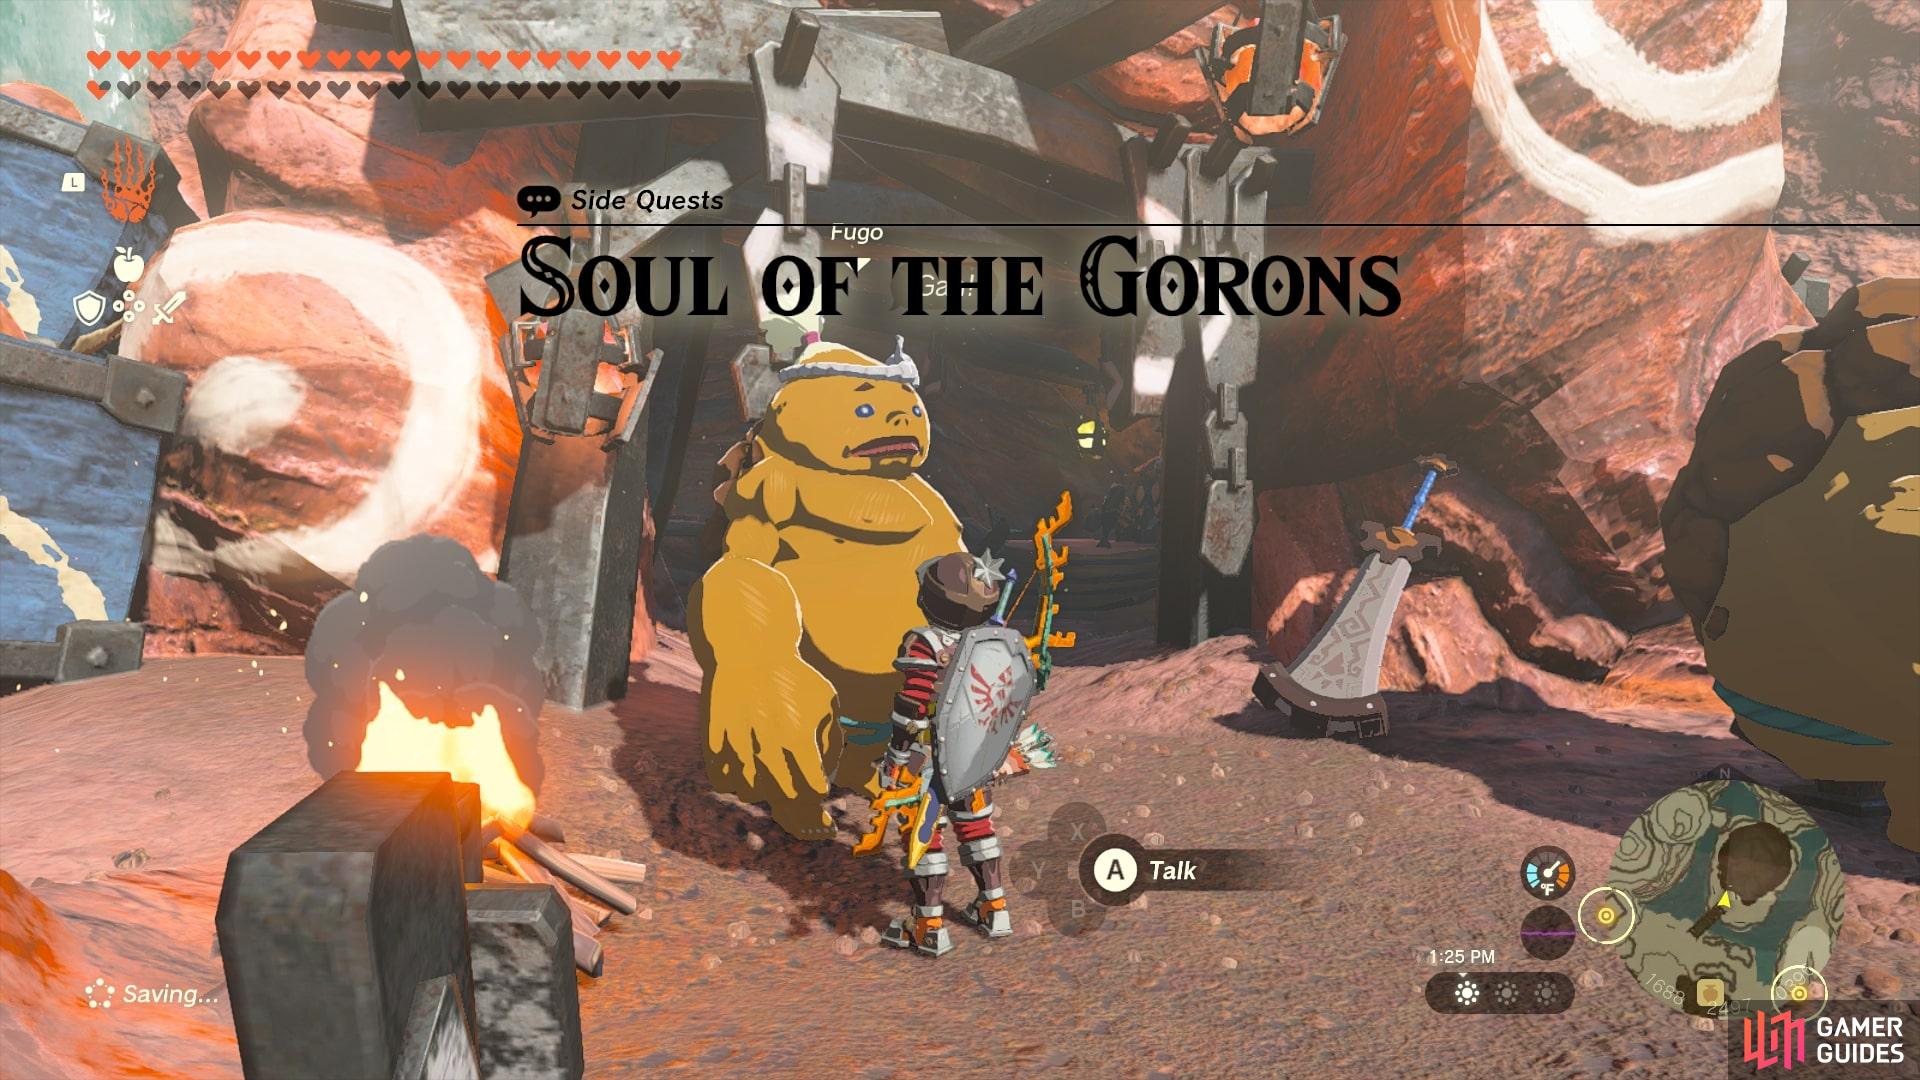 Speak with Fugo after completing the Fire Temple to start Soul of The Gorons.